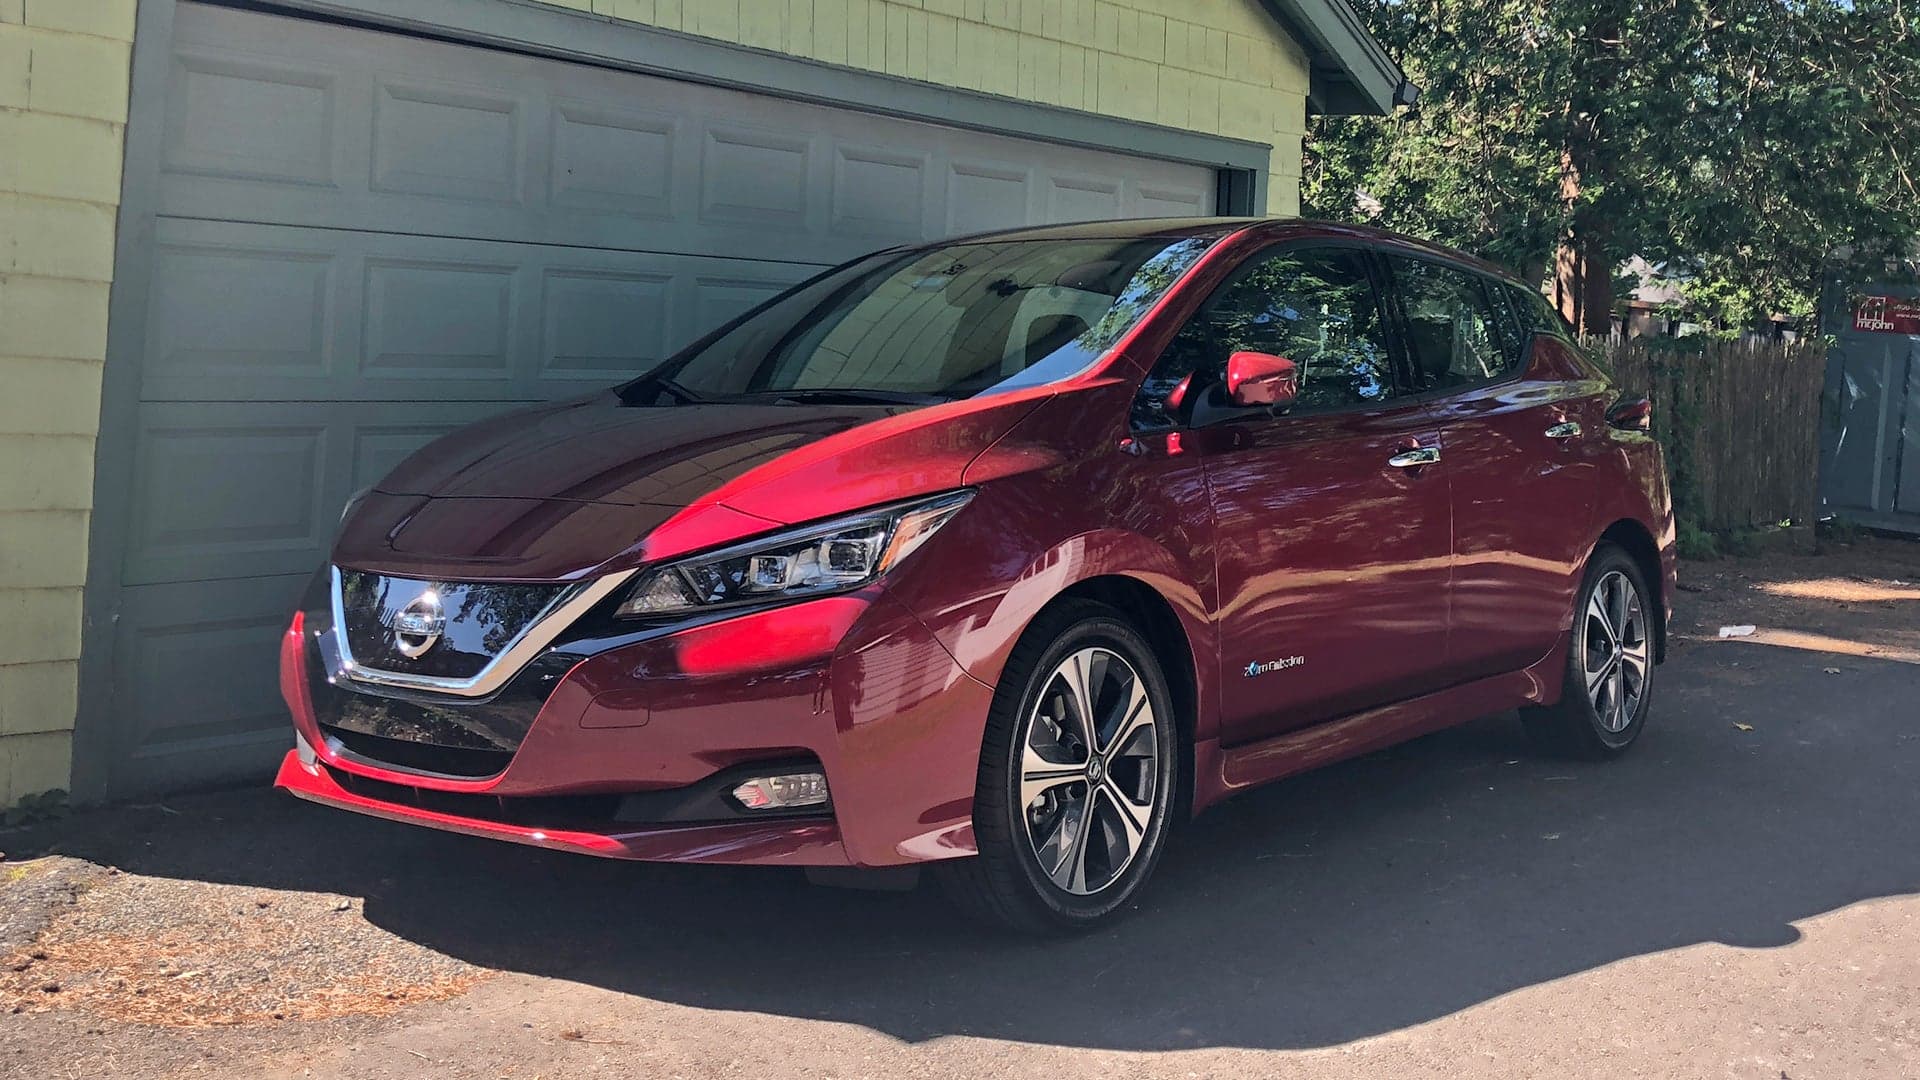 2018 Nissan Leaf SL Group Review: Another Argument for the Inevitable Rise of the Electric Car